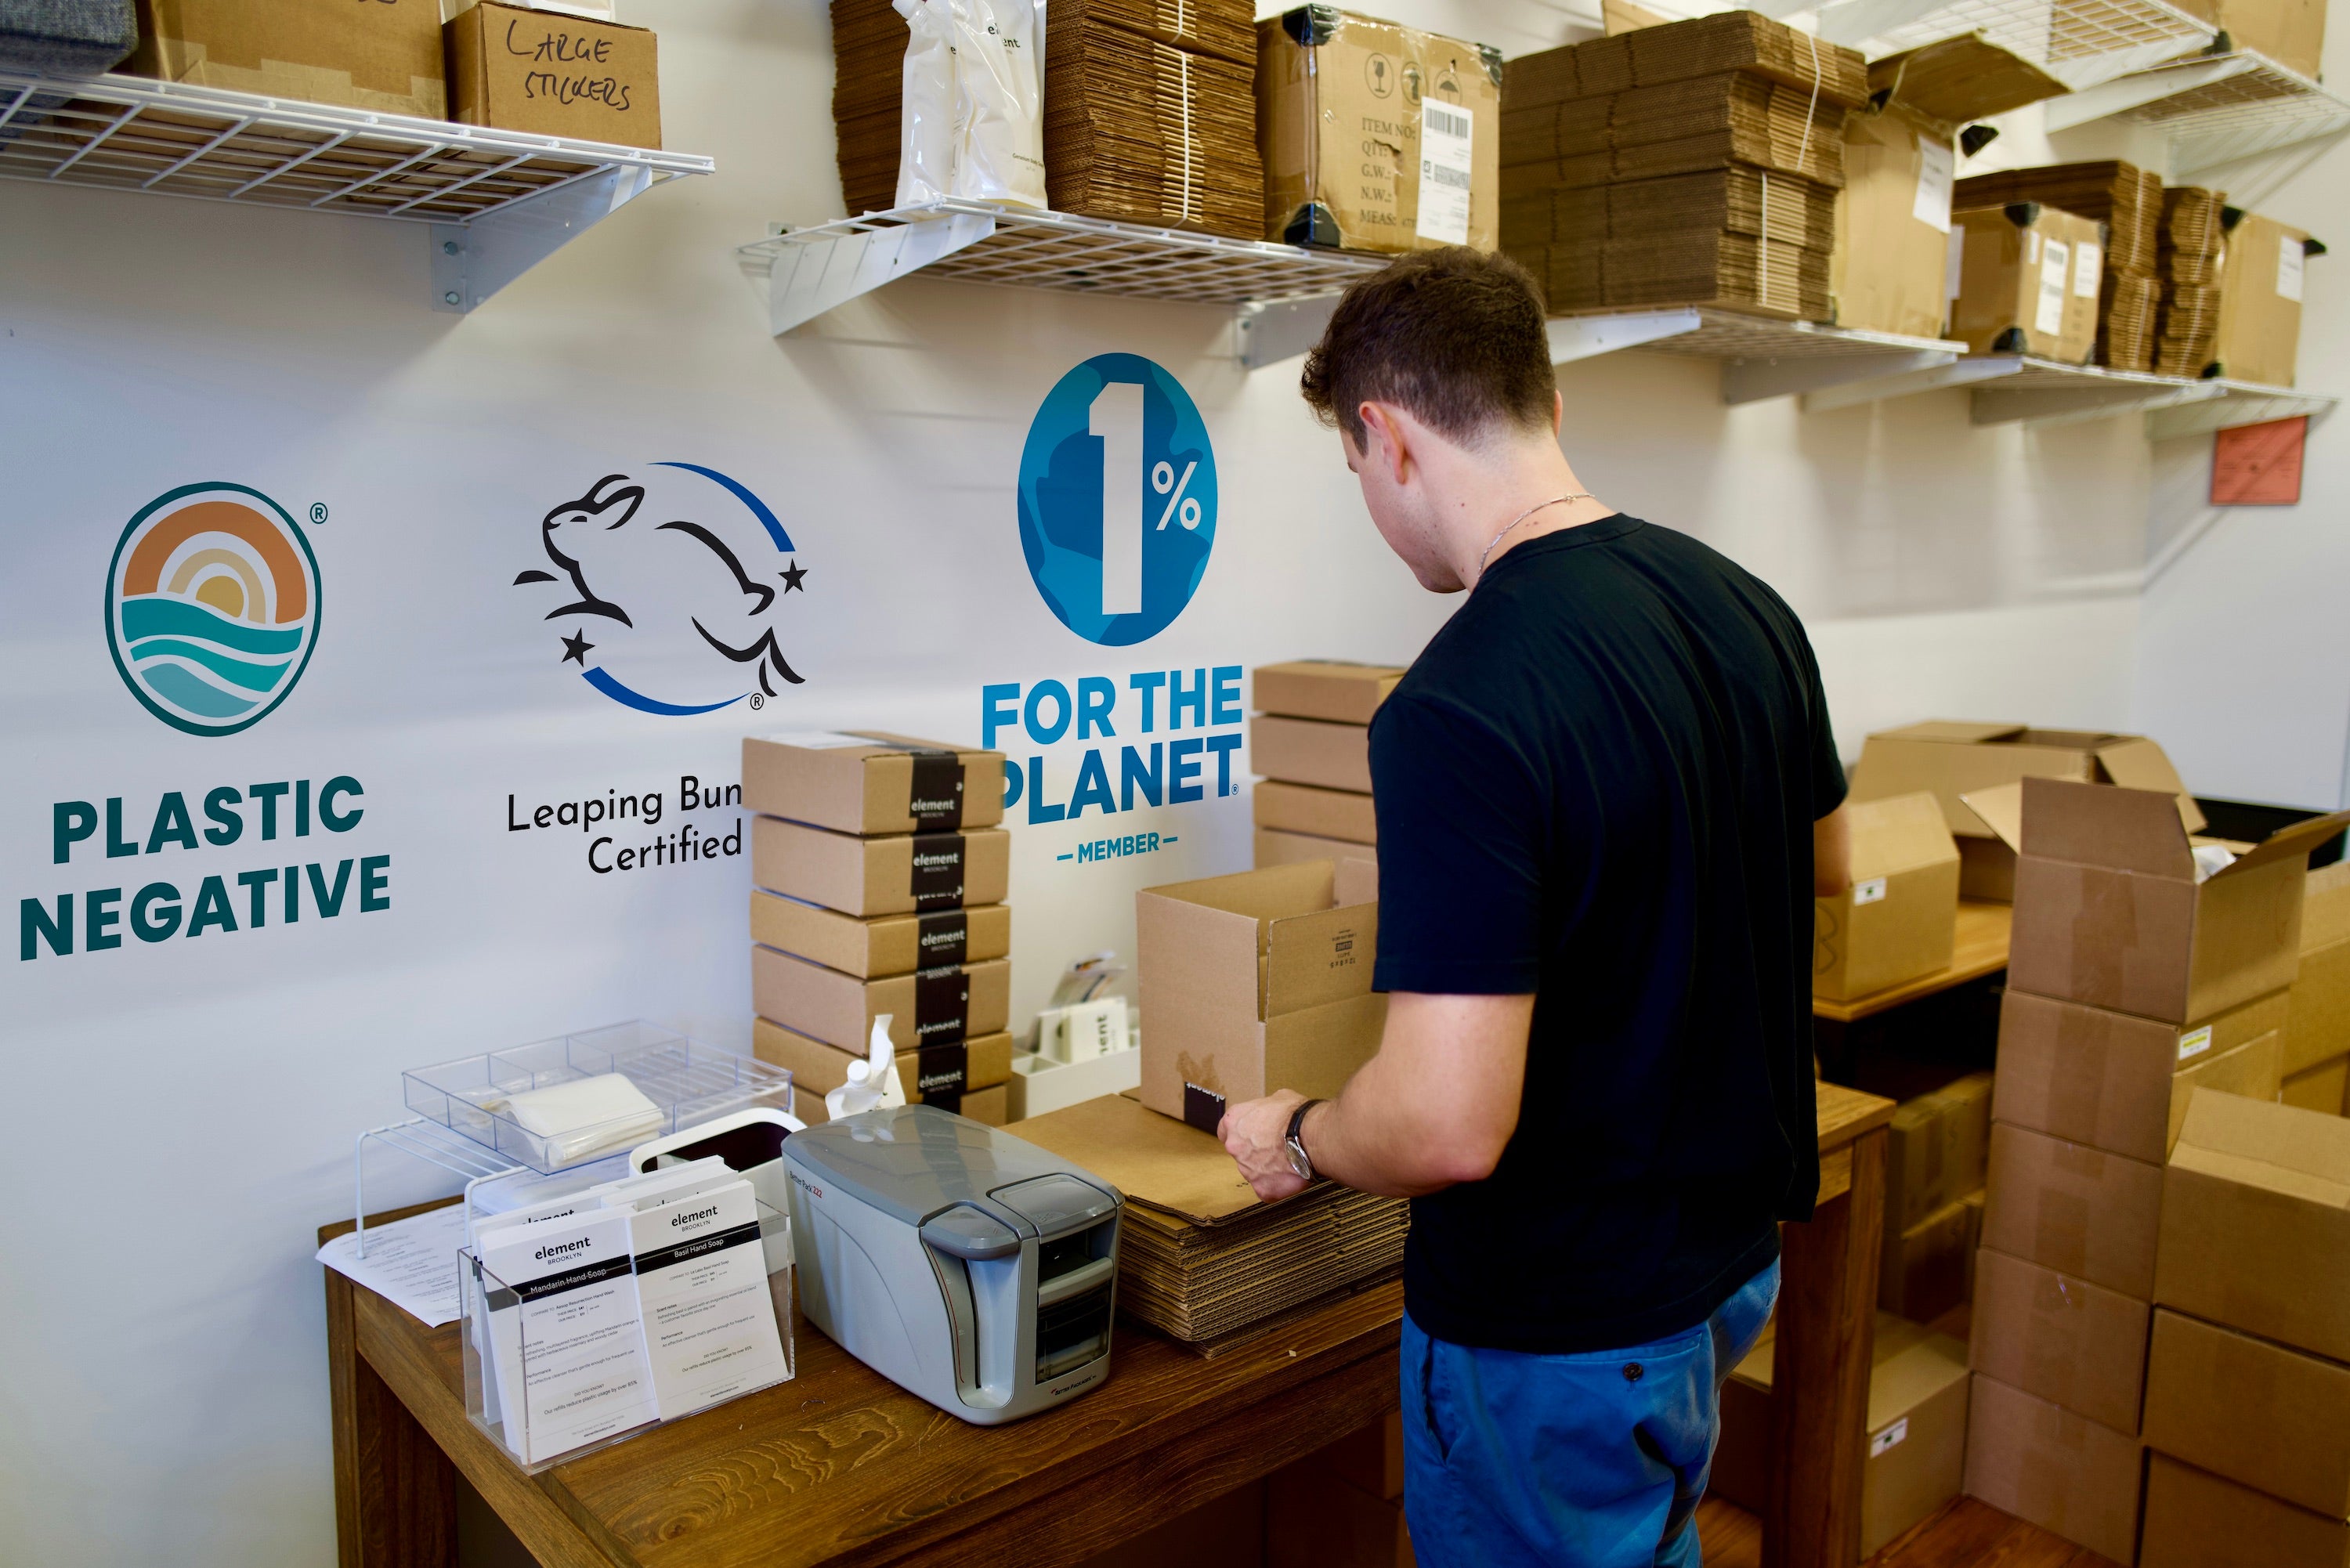 A picking and packing station including a shipping label printer, packed boxes and a fulfillment worker.